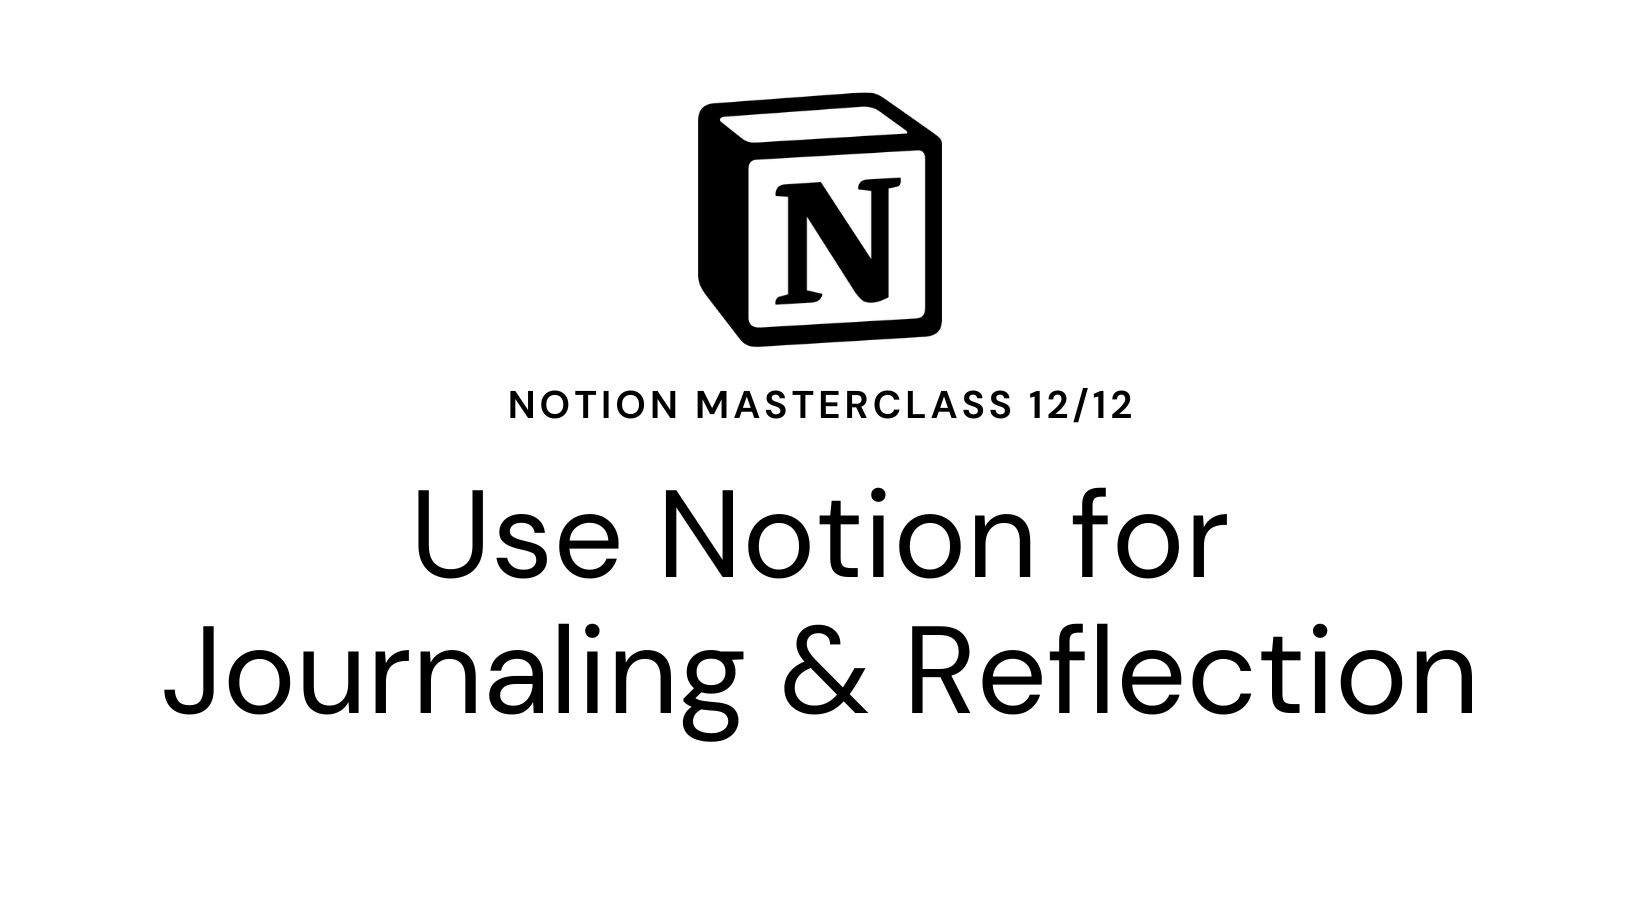 5 Creative Ways to Use Notion for Journaling and Reflection